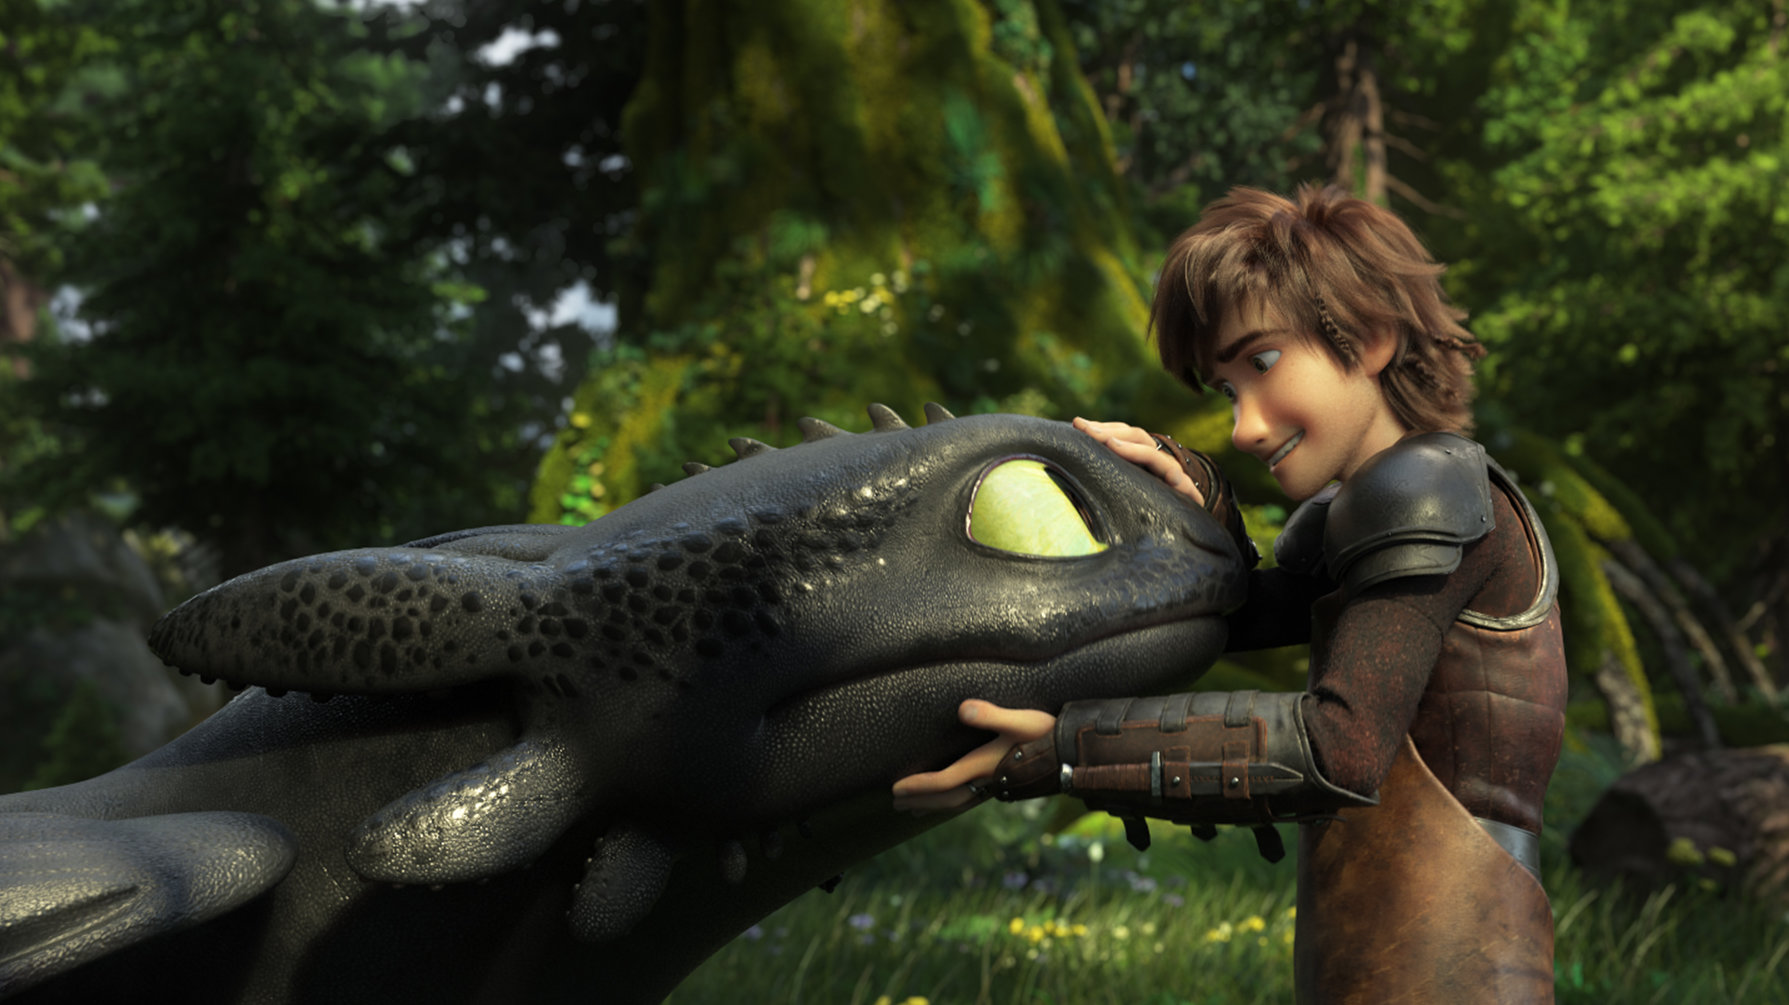 dan hagey add photo how to train your dragon images of toothless